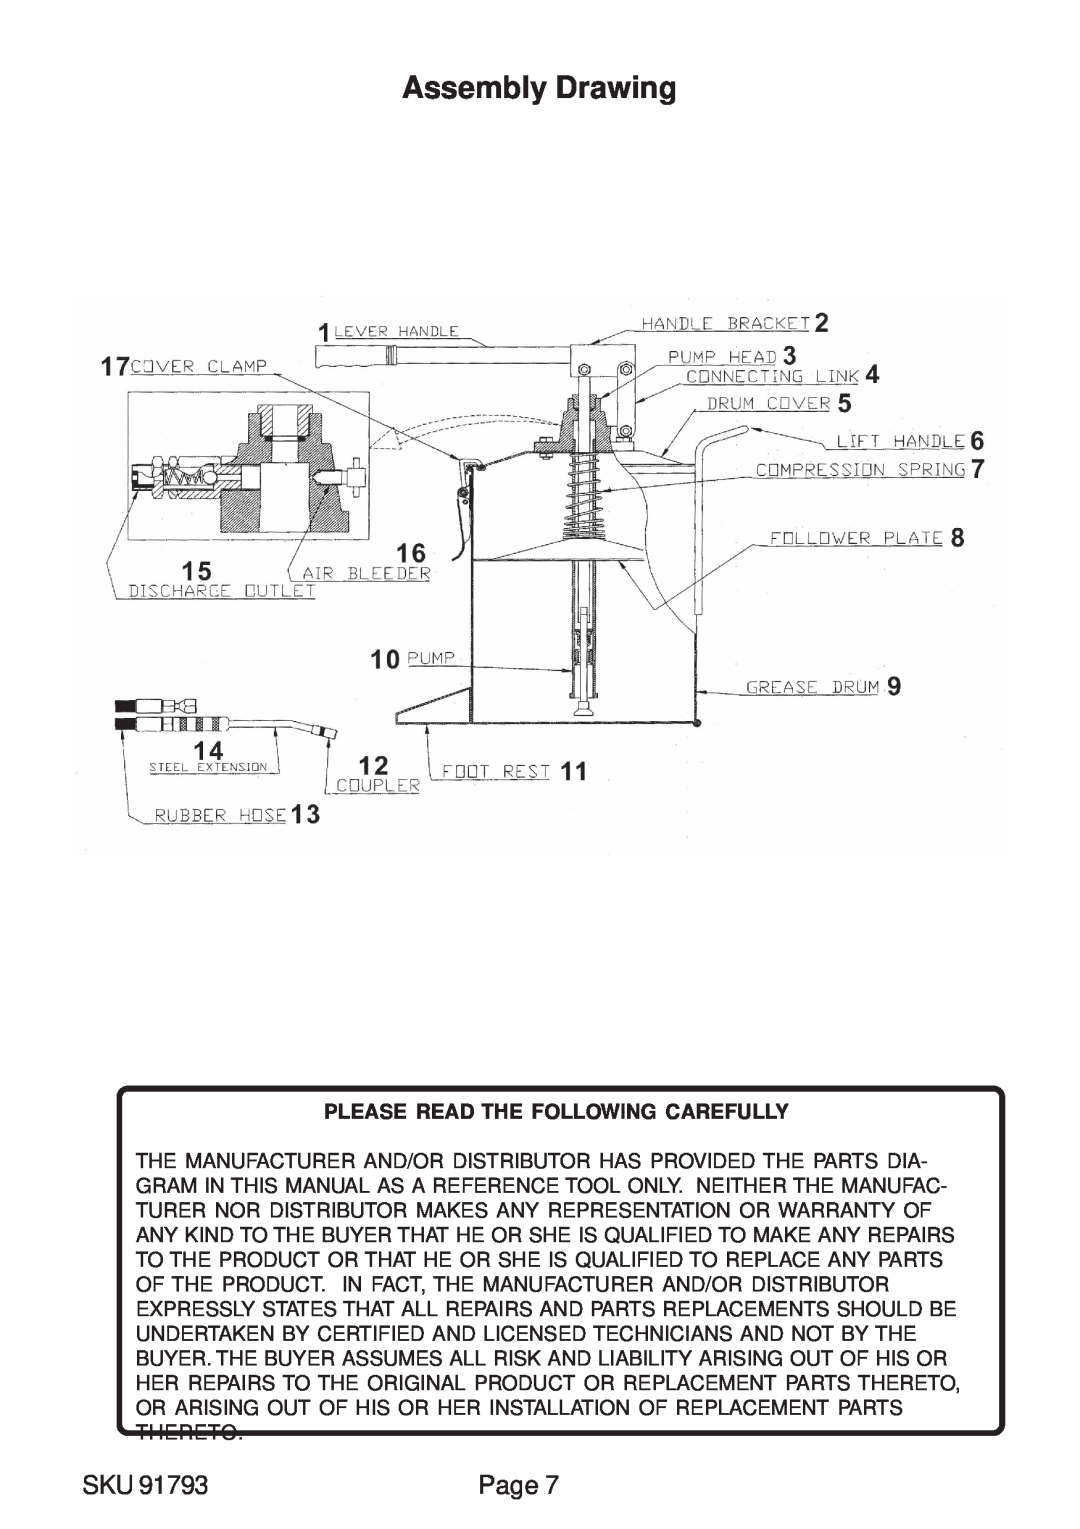 Harbor Freight Tools 91793 manual Assembly Drawing, Please Read The Following Carefully 